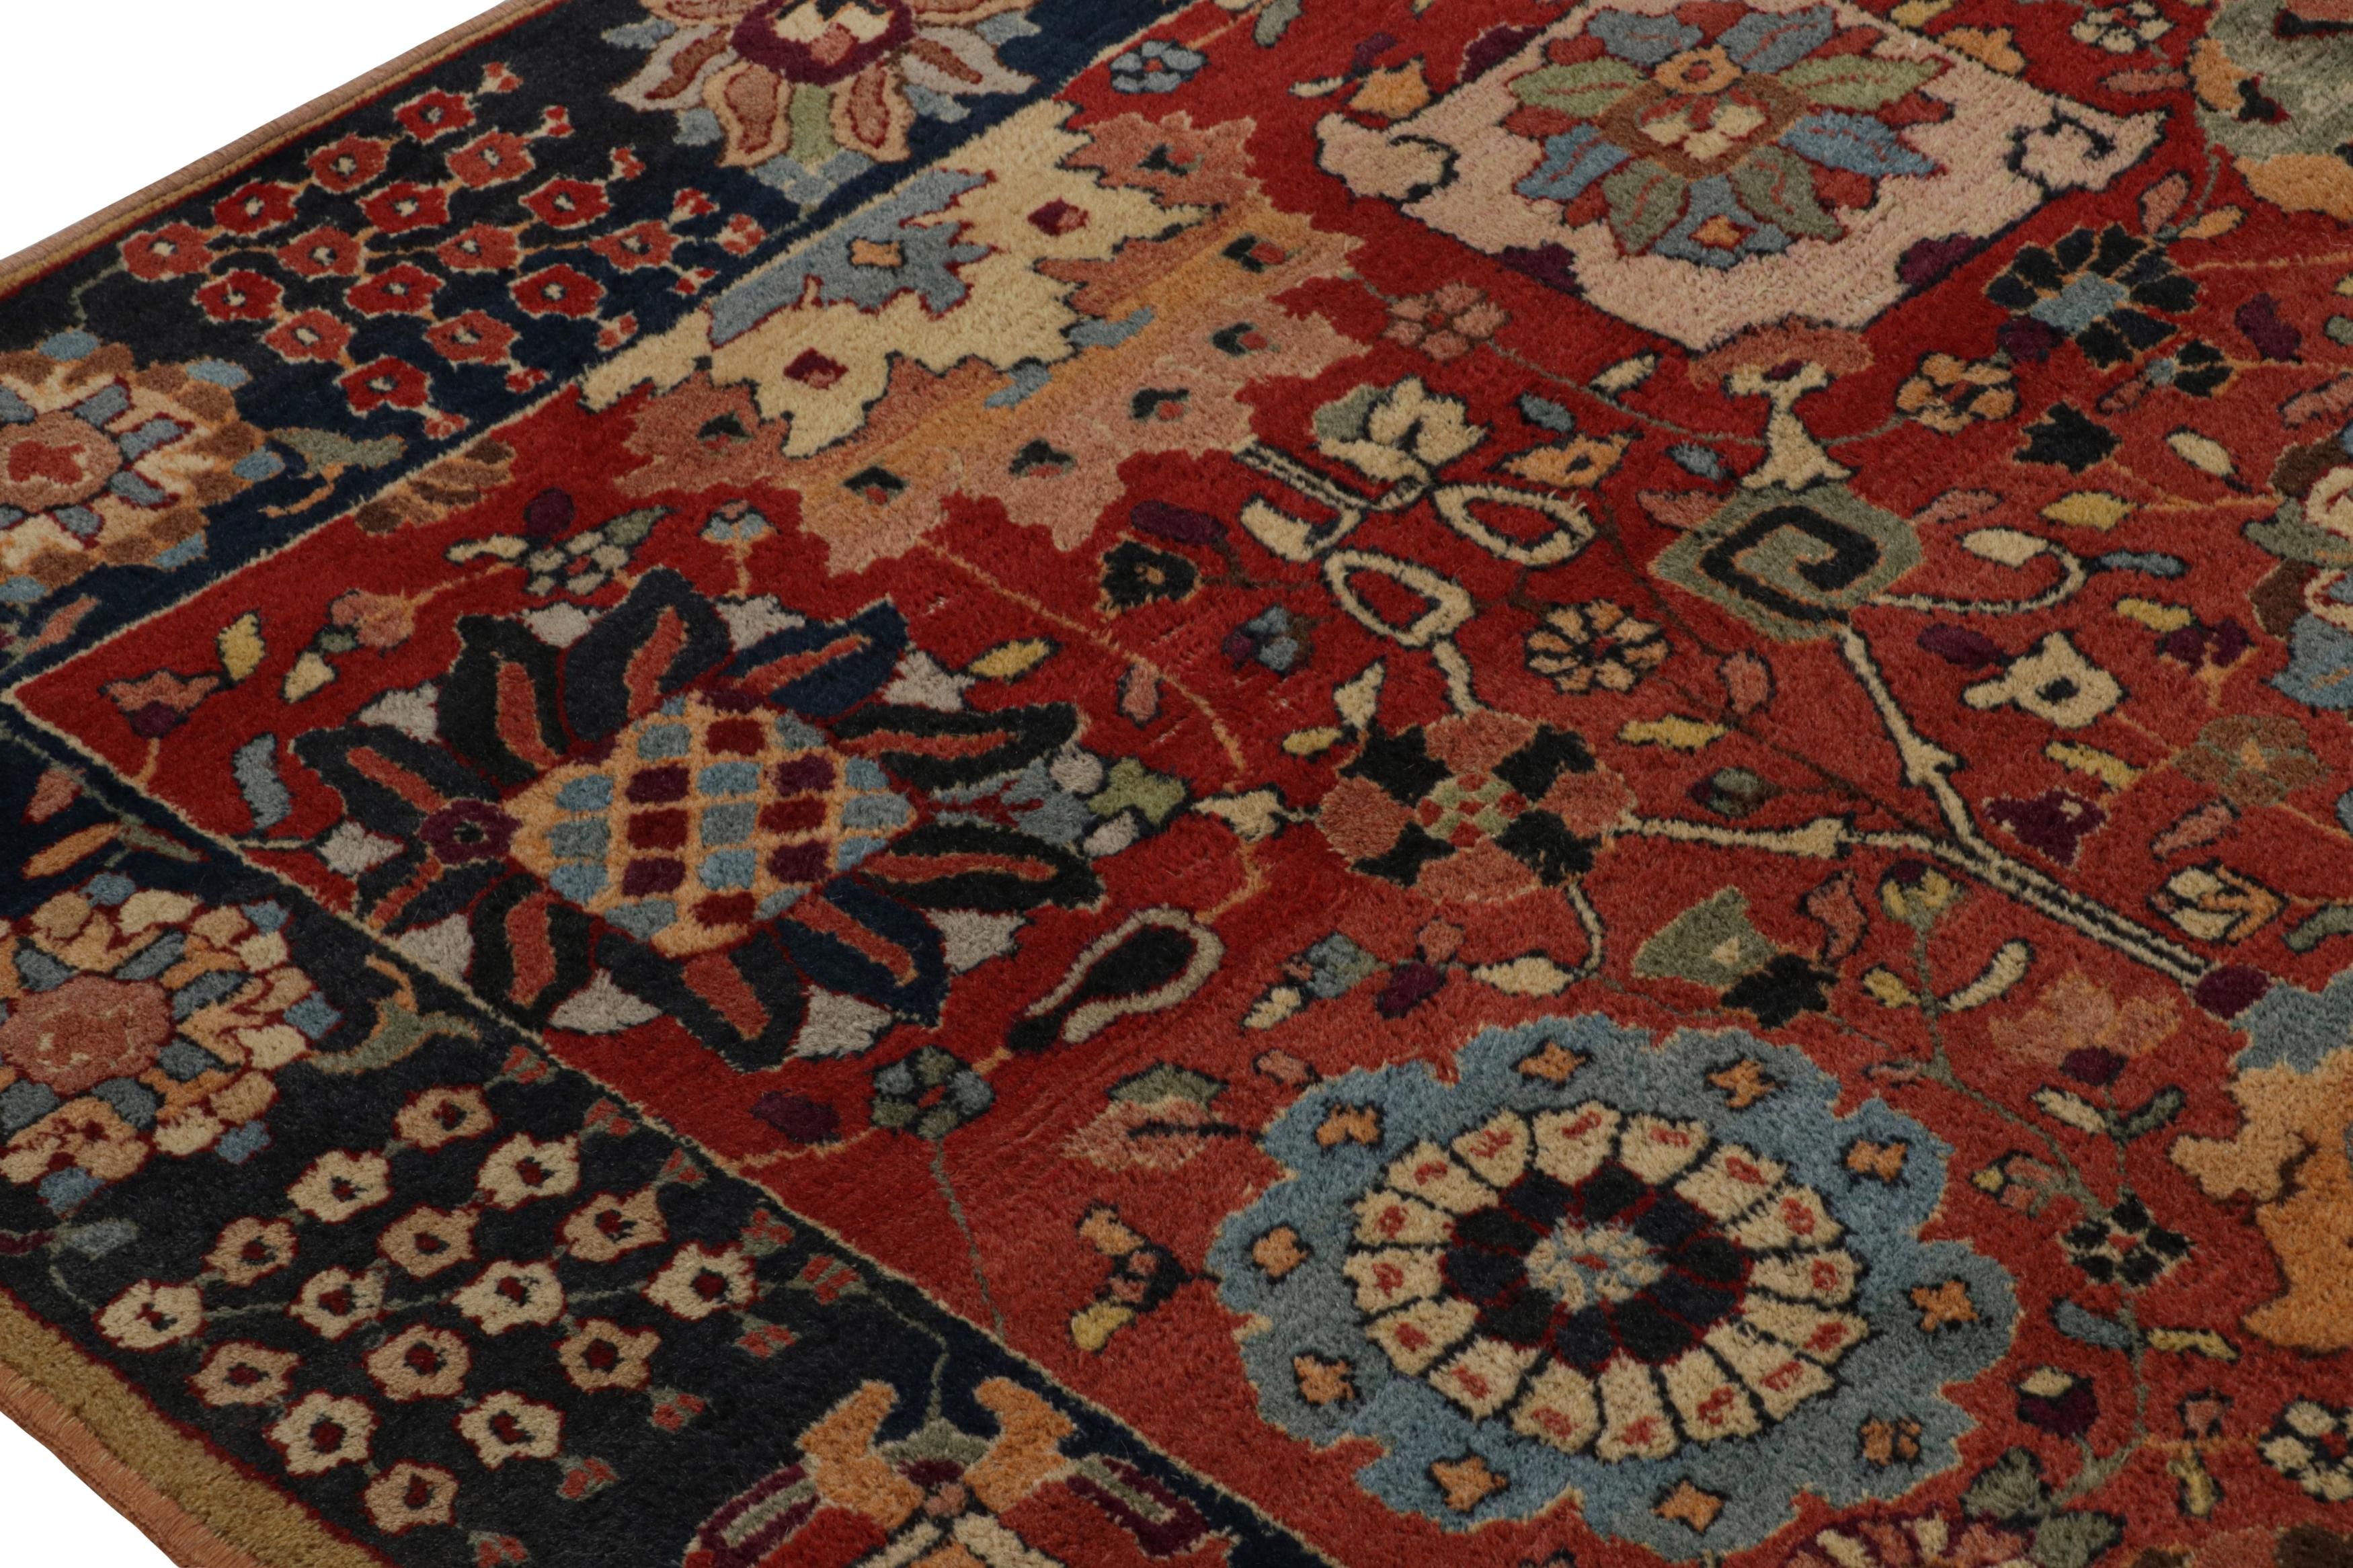 Antique Handmade Hooked Rug in Red with Floral patterns, from Rug & Kilim In Good Condition For Sale In Long Island City, NY